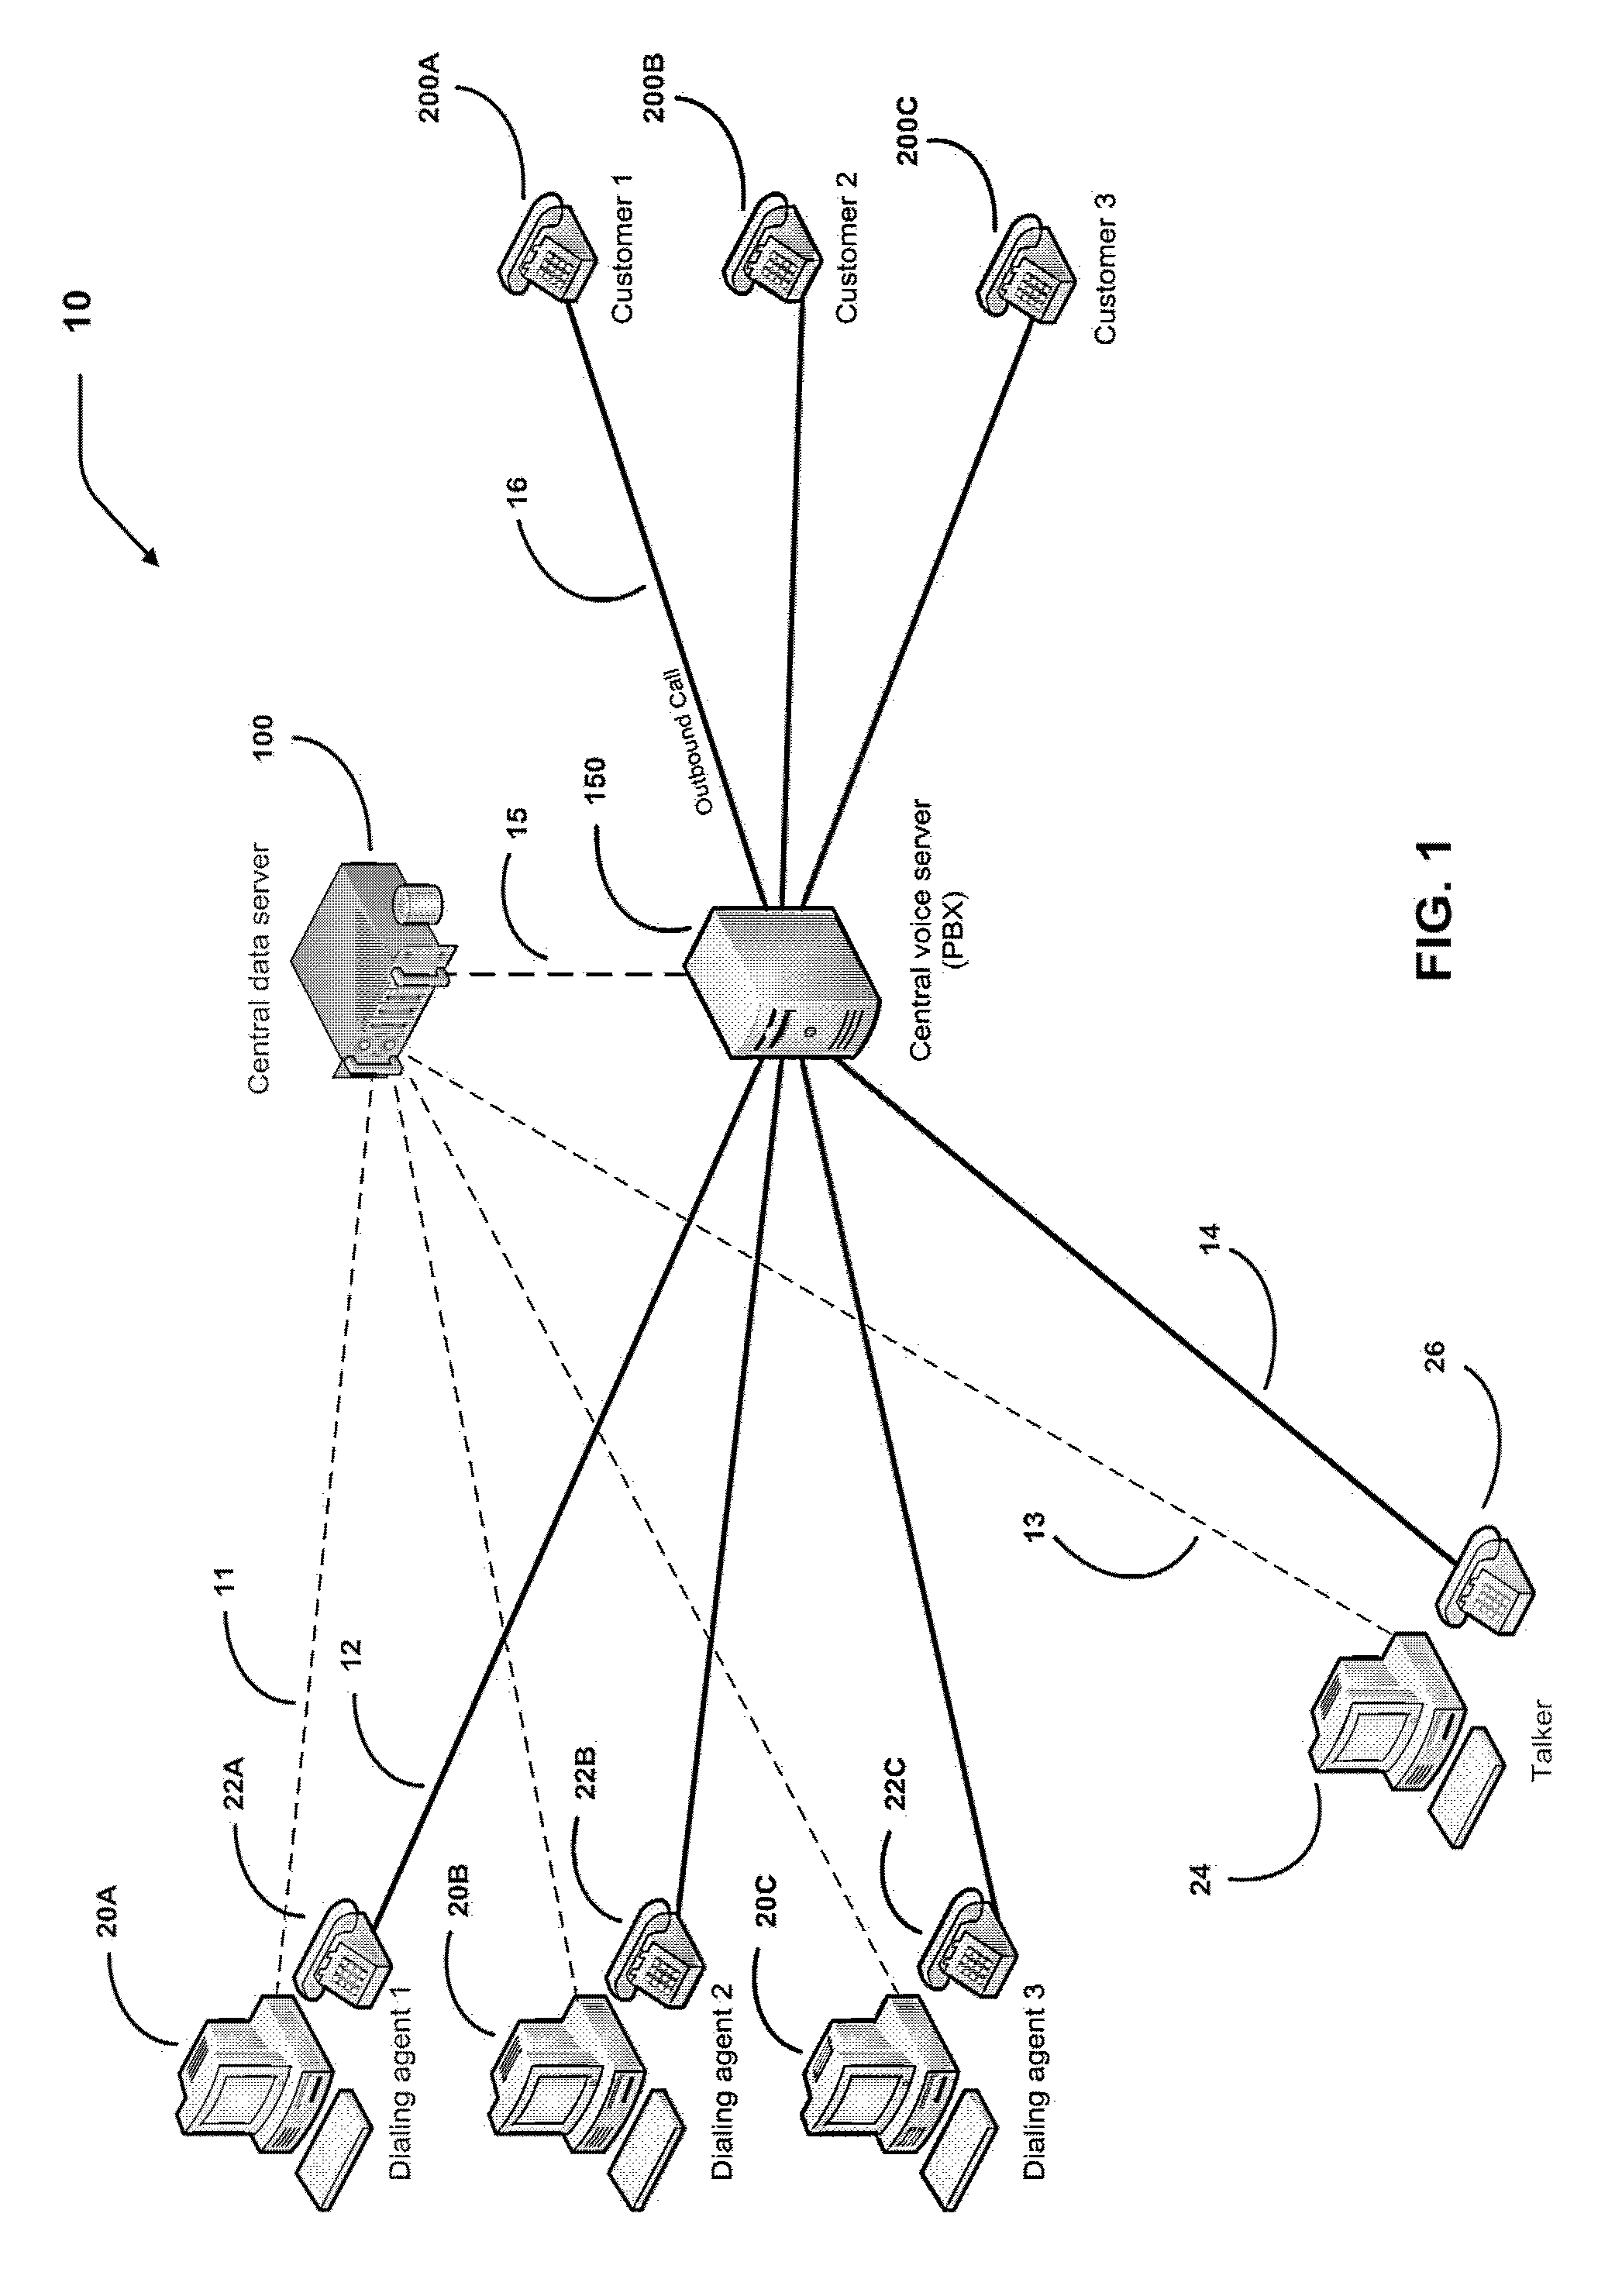 System and method for providing sales and marketing acceleration and effectiveness